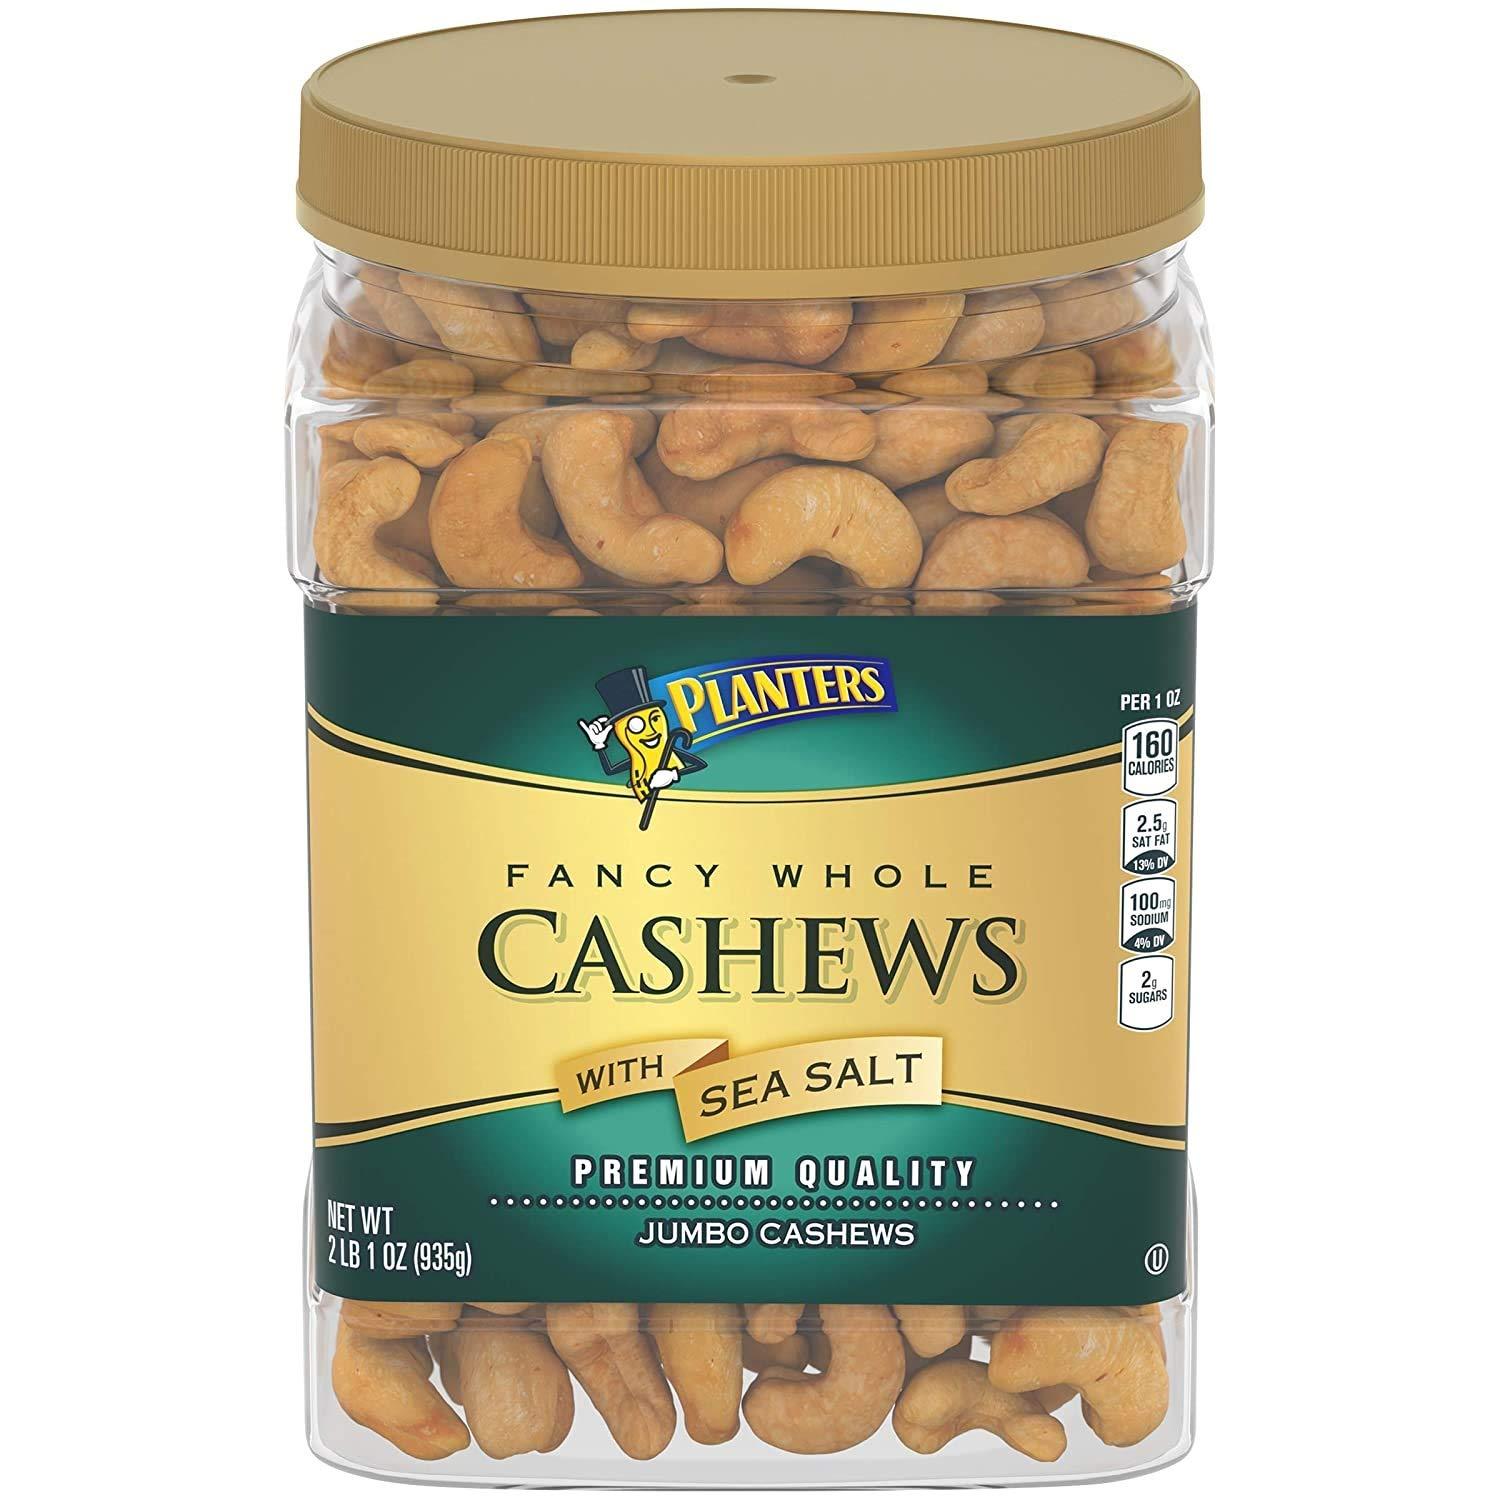 33Oz Planters Fancy Whole Cashews with Sea Salt for $11.93 Shipped